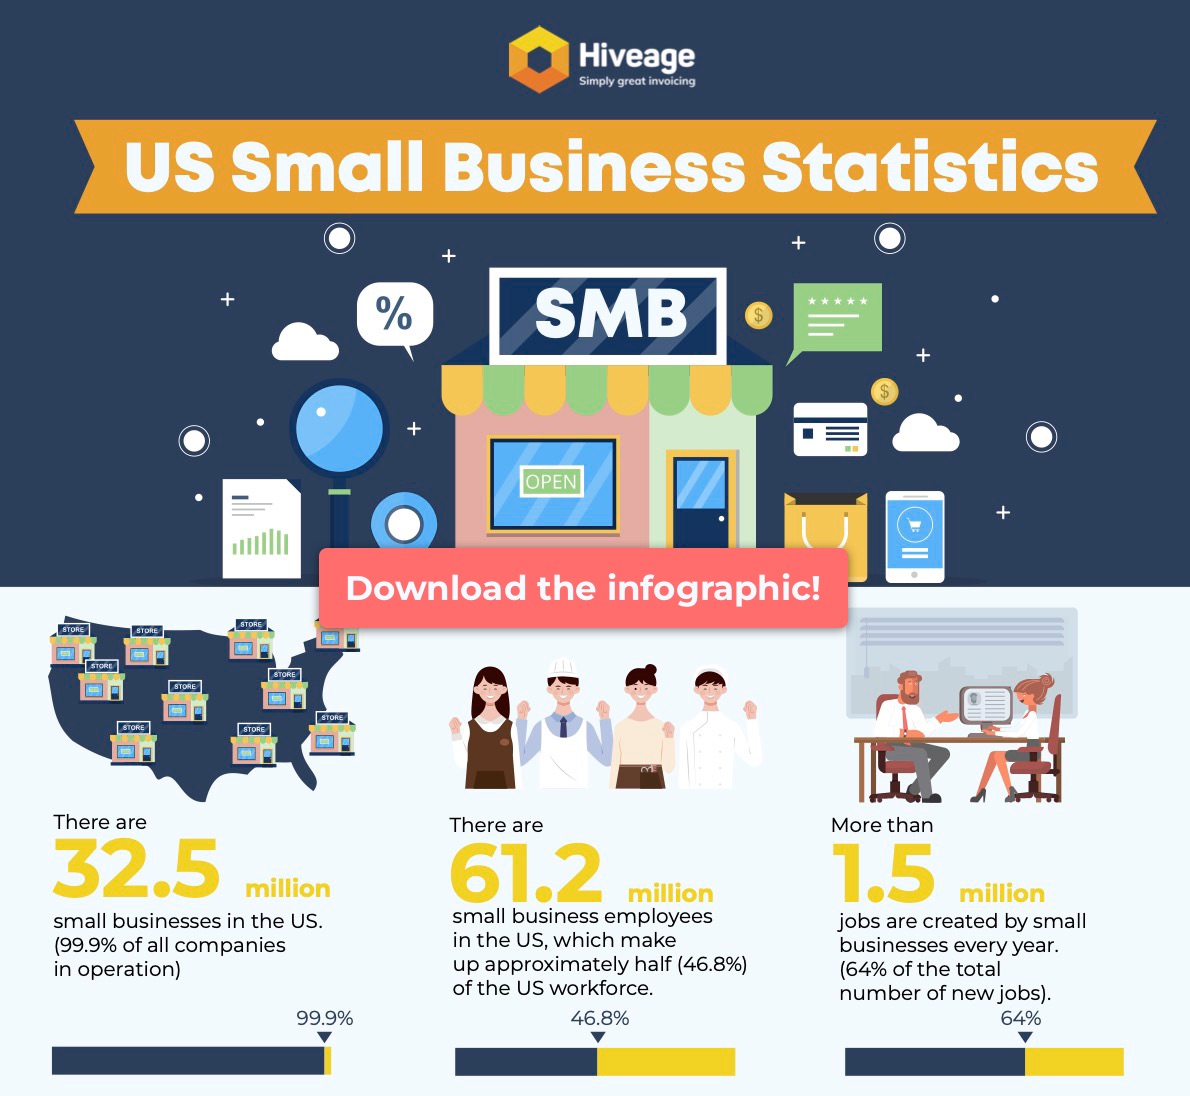 US small businesses statistics as an infographic